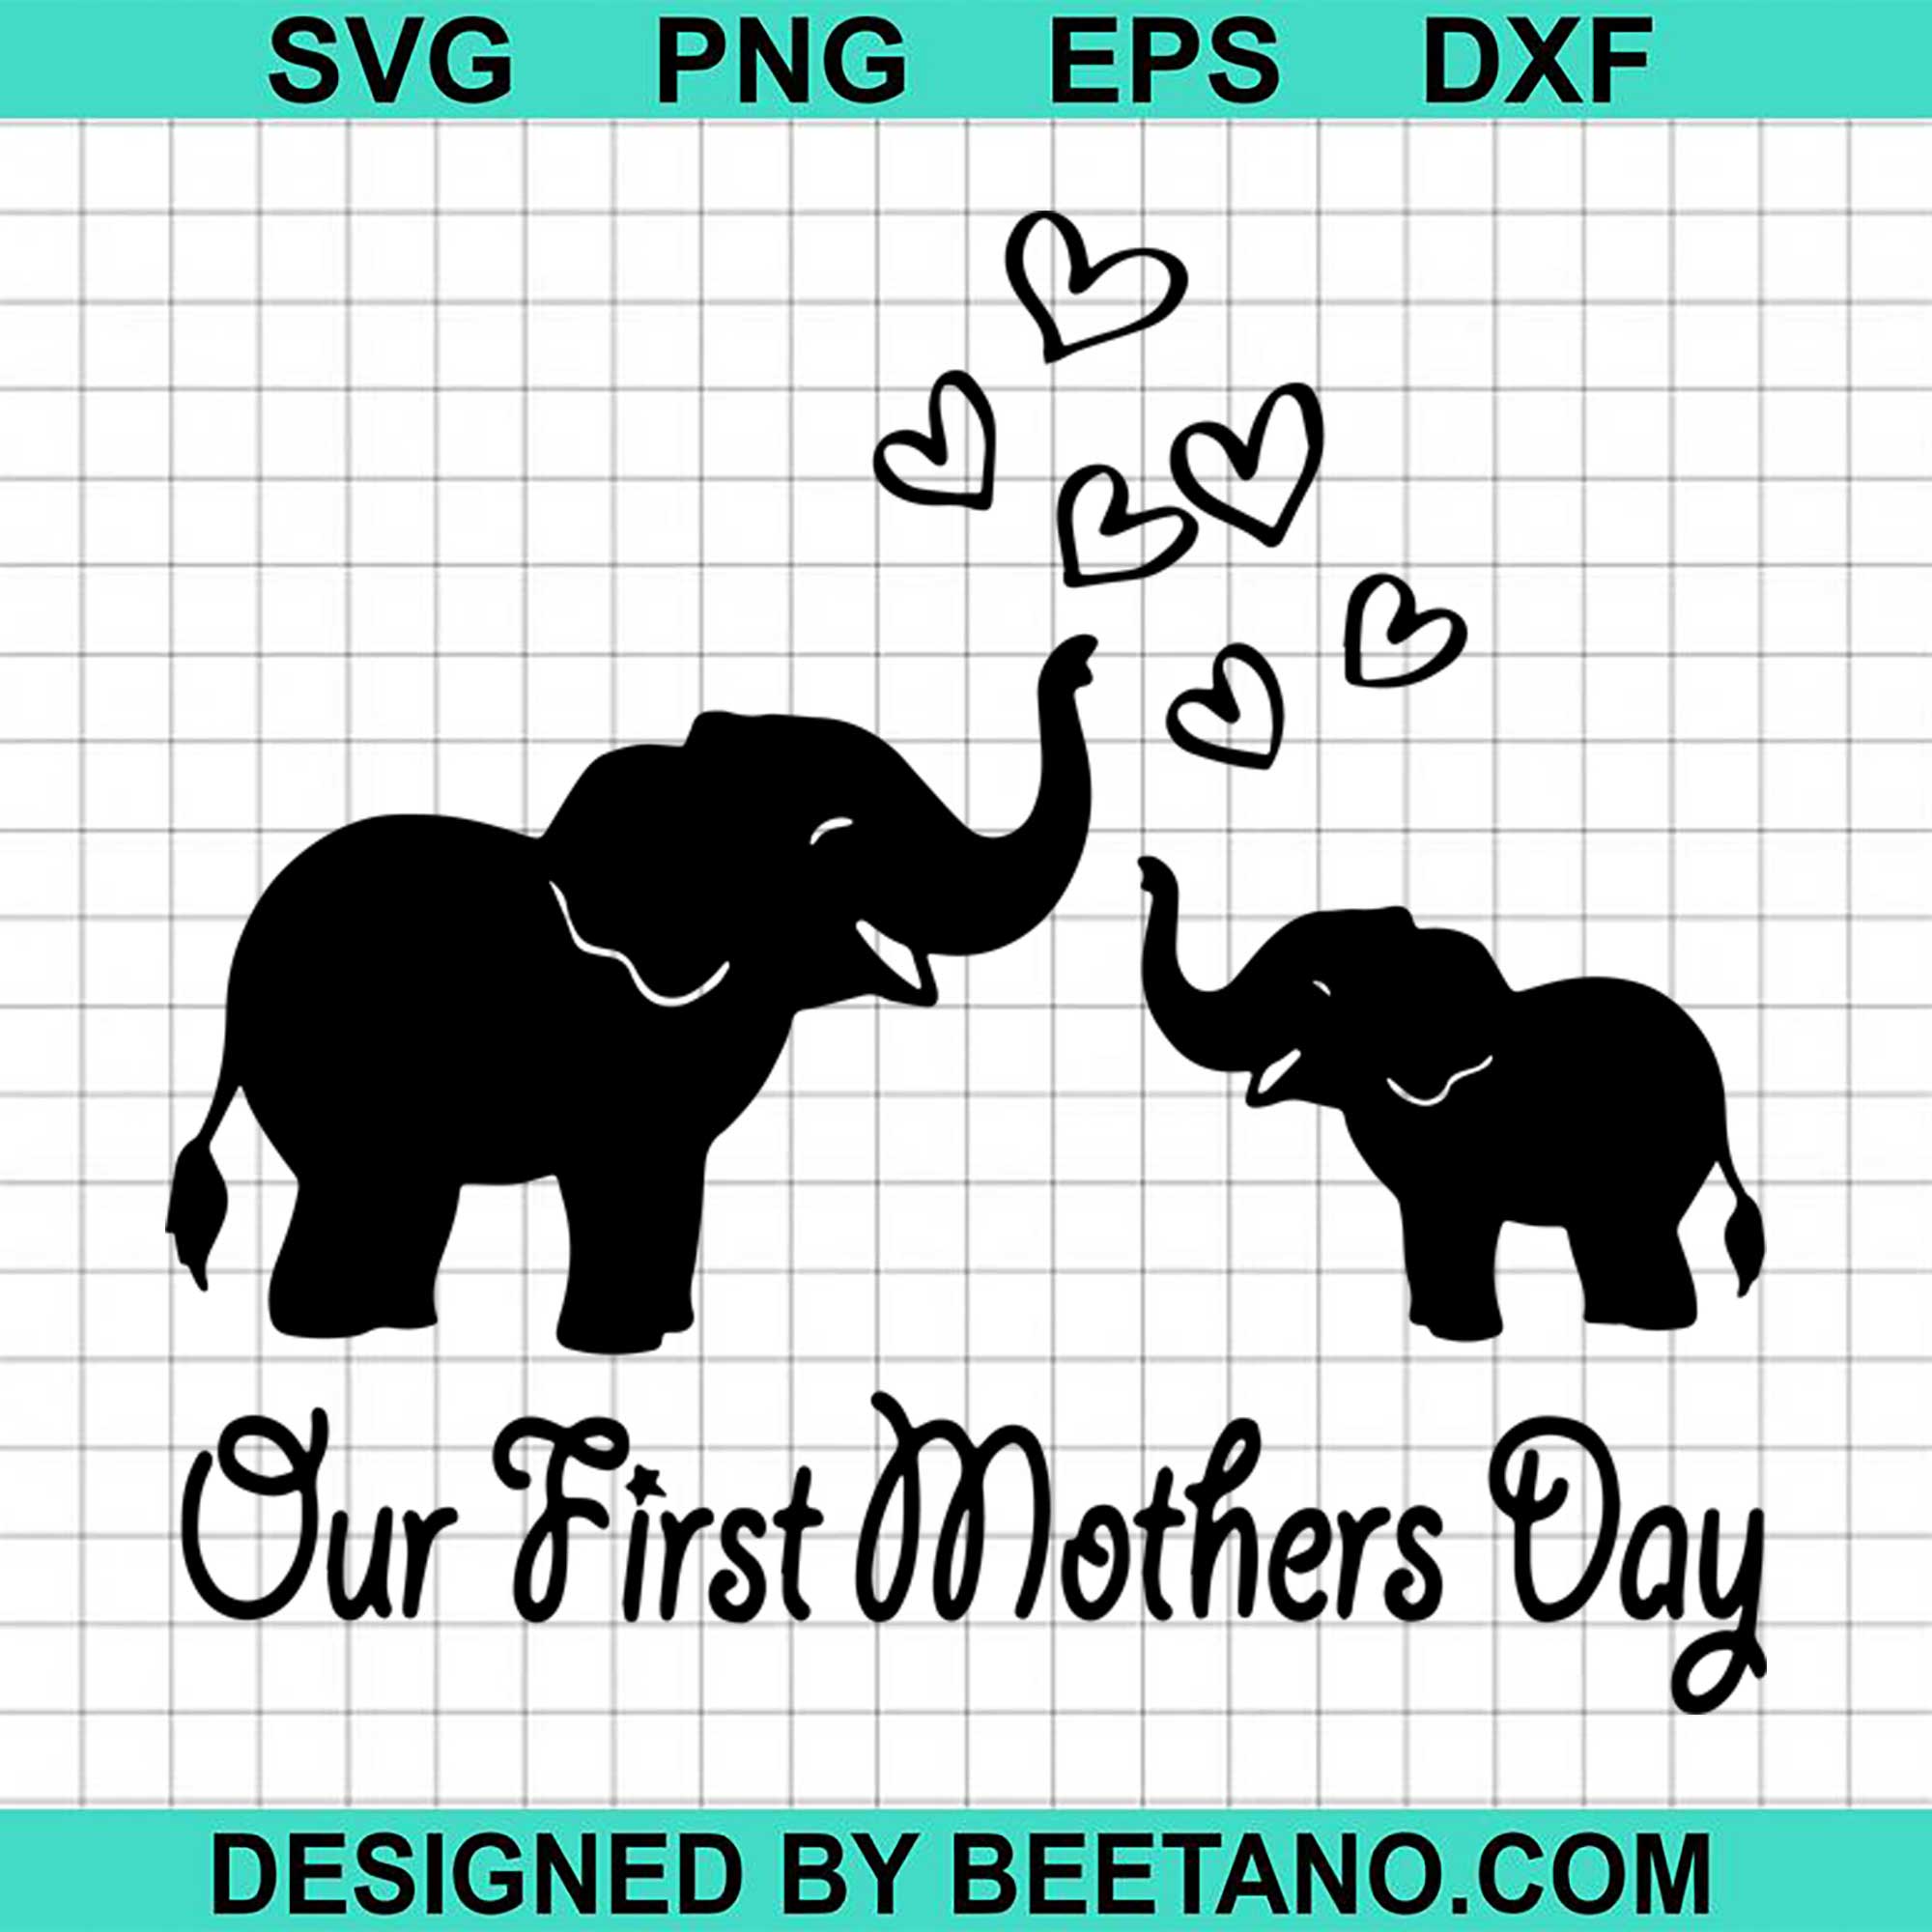 Download Elephant Matching Mom Baby Our First Mother Day Svg Cut File For Cricu